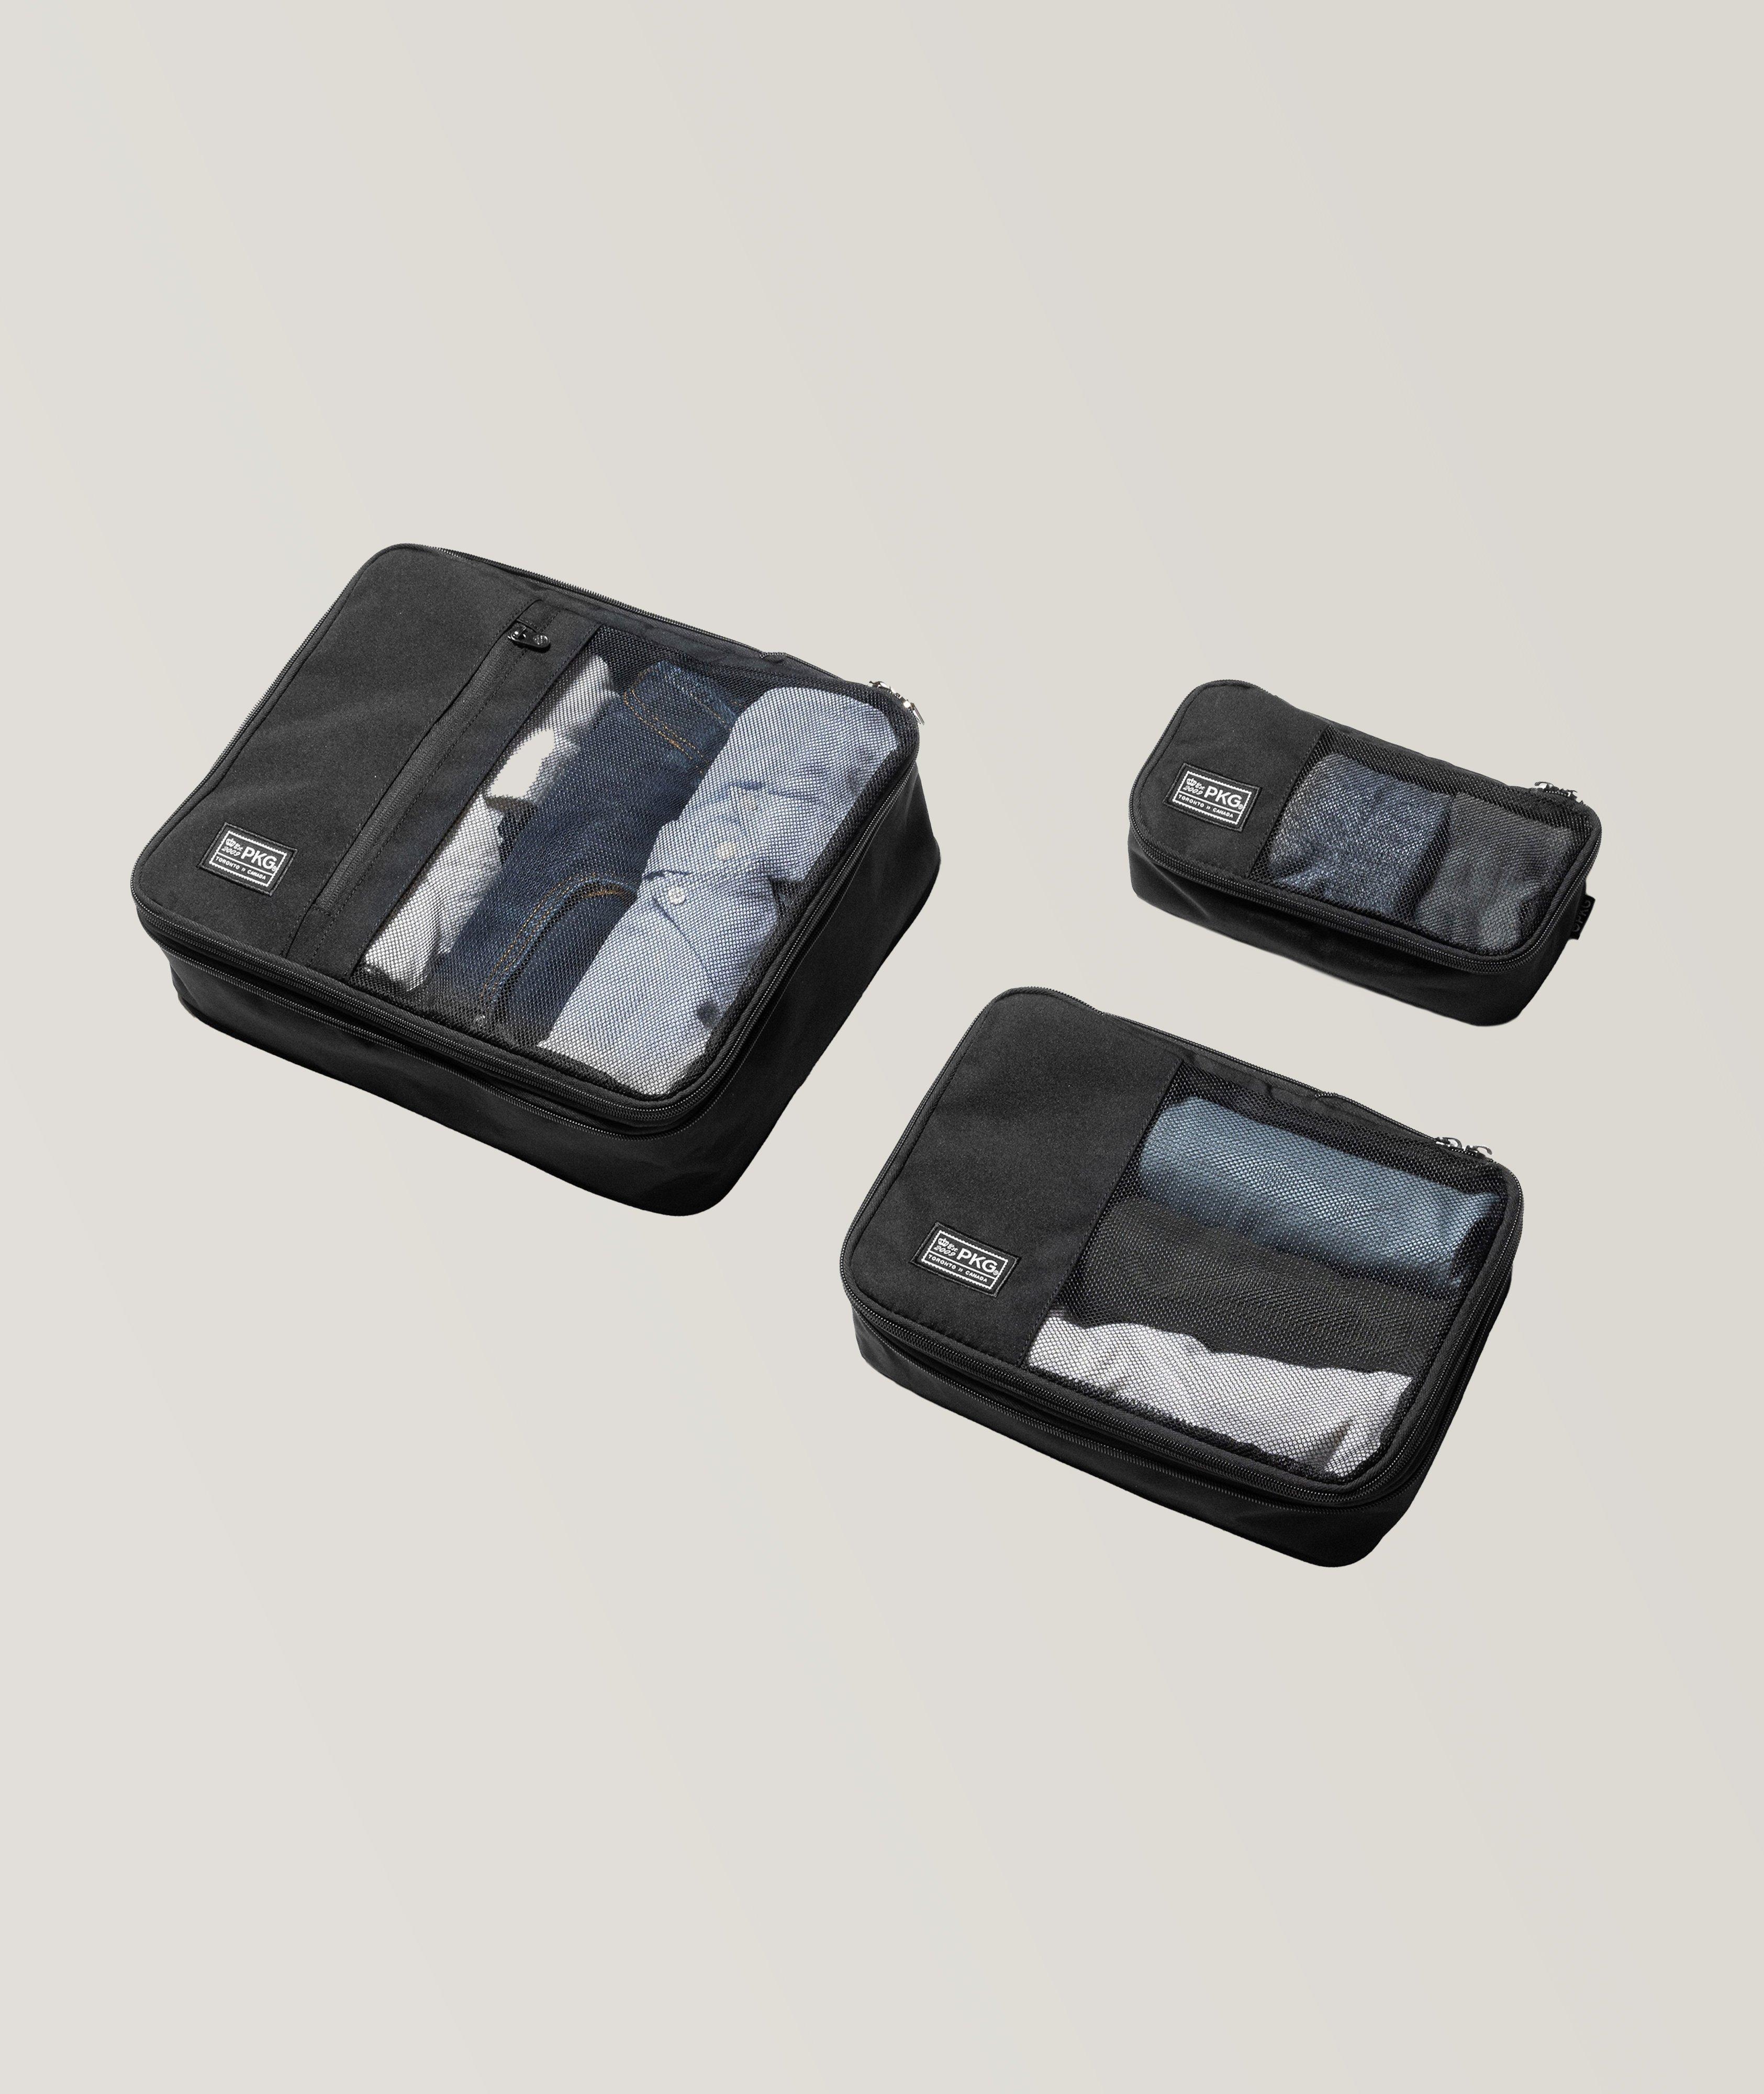  3 Pack Union Compression Packing Cubes  image 0